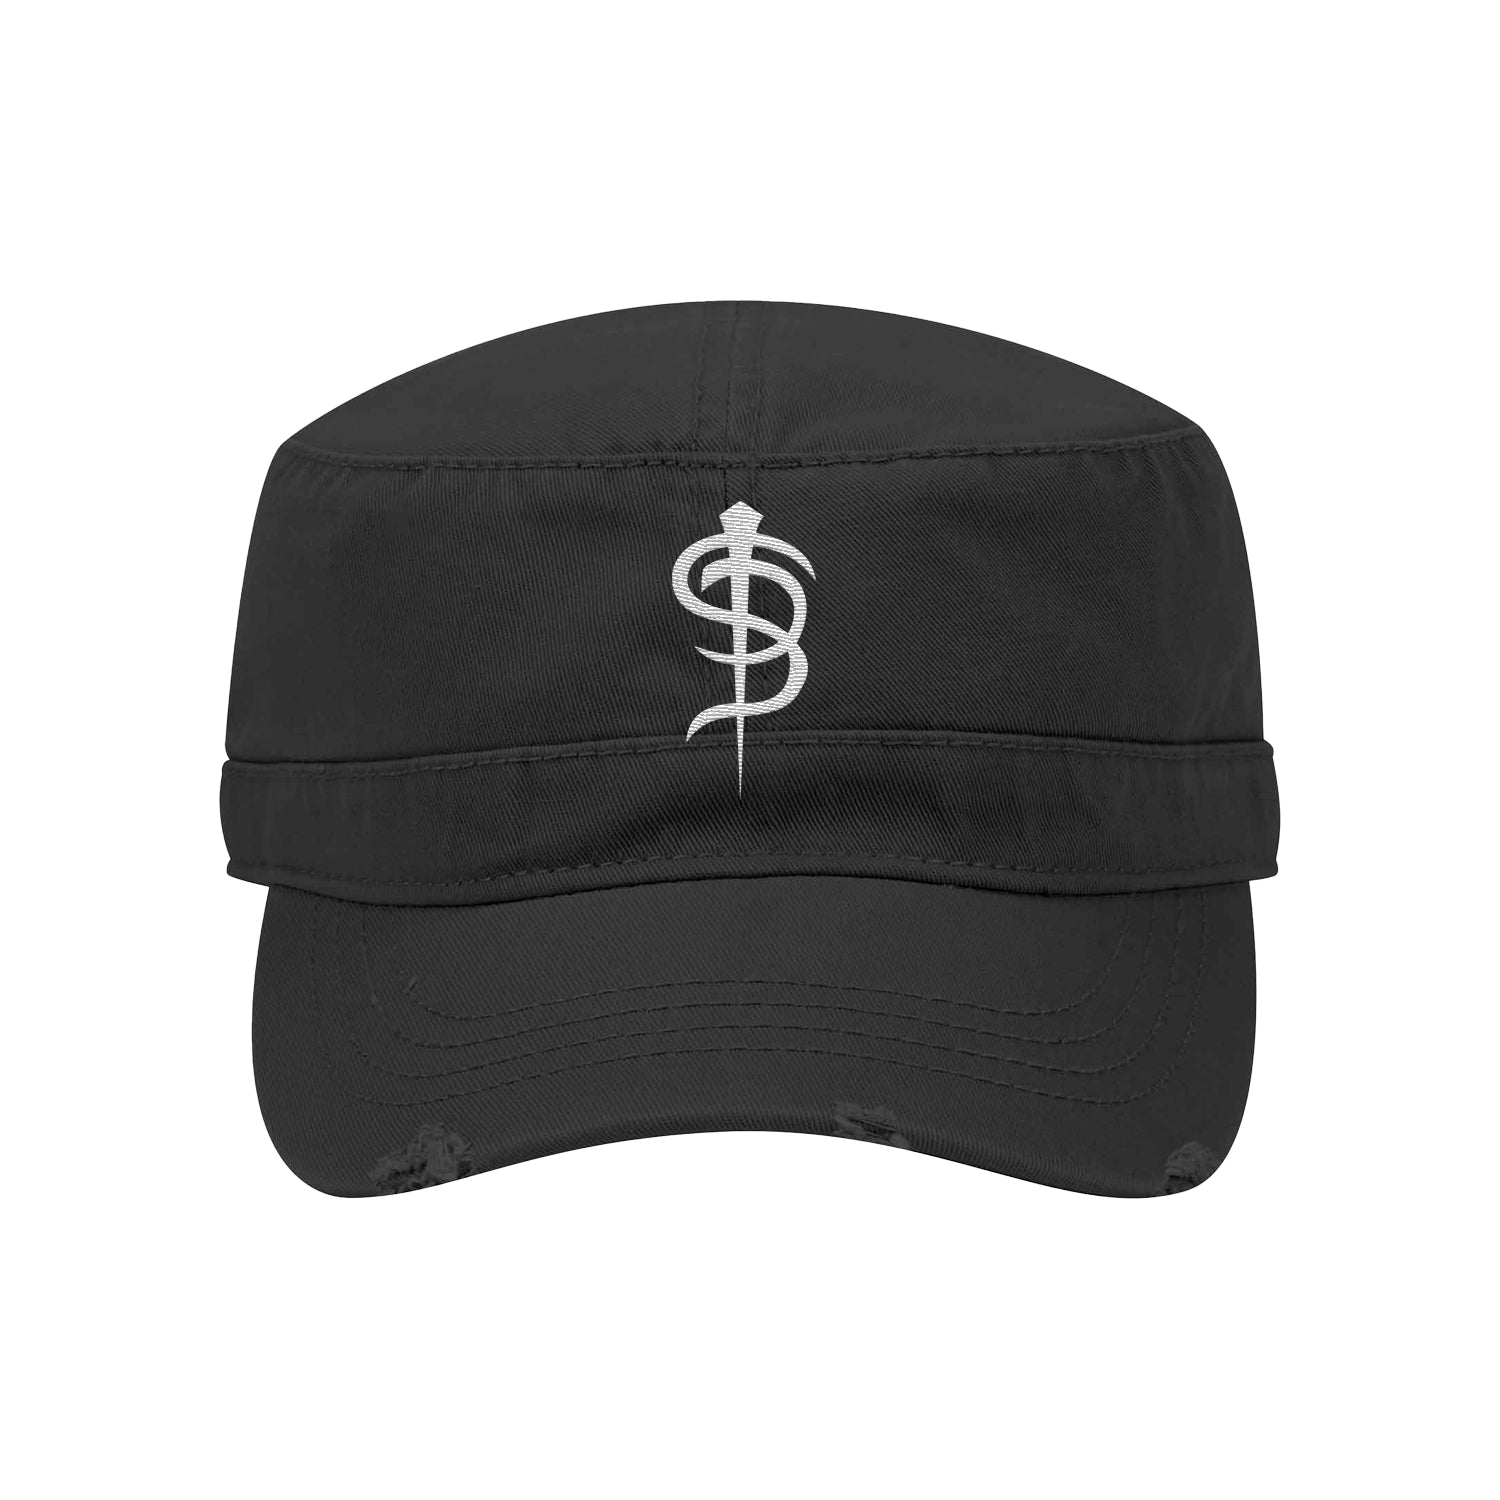 Black military cap on a white background. The hat shows purposeful signs of distress on the brim of the hat. The center of the hat features the skinny puppy sp logo in white.